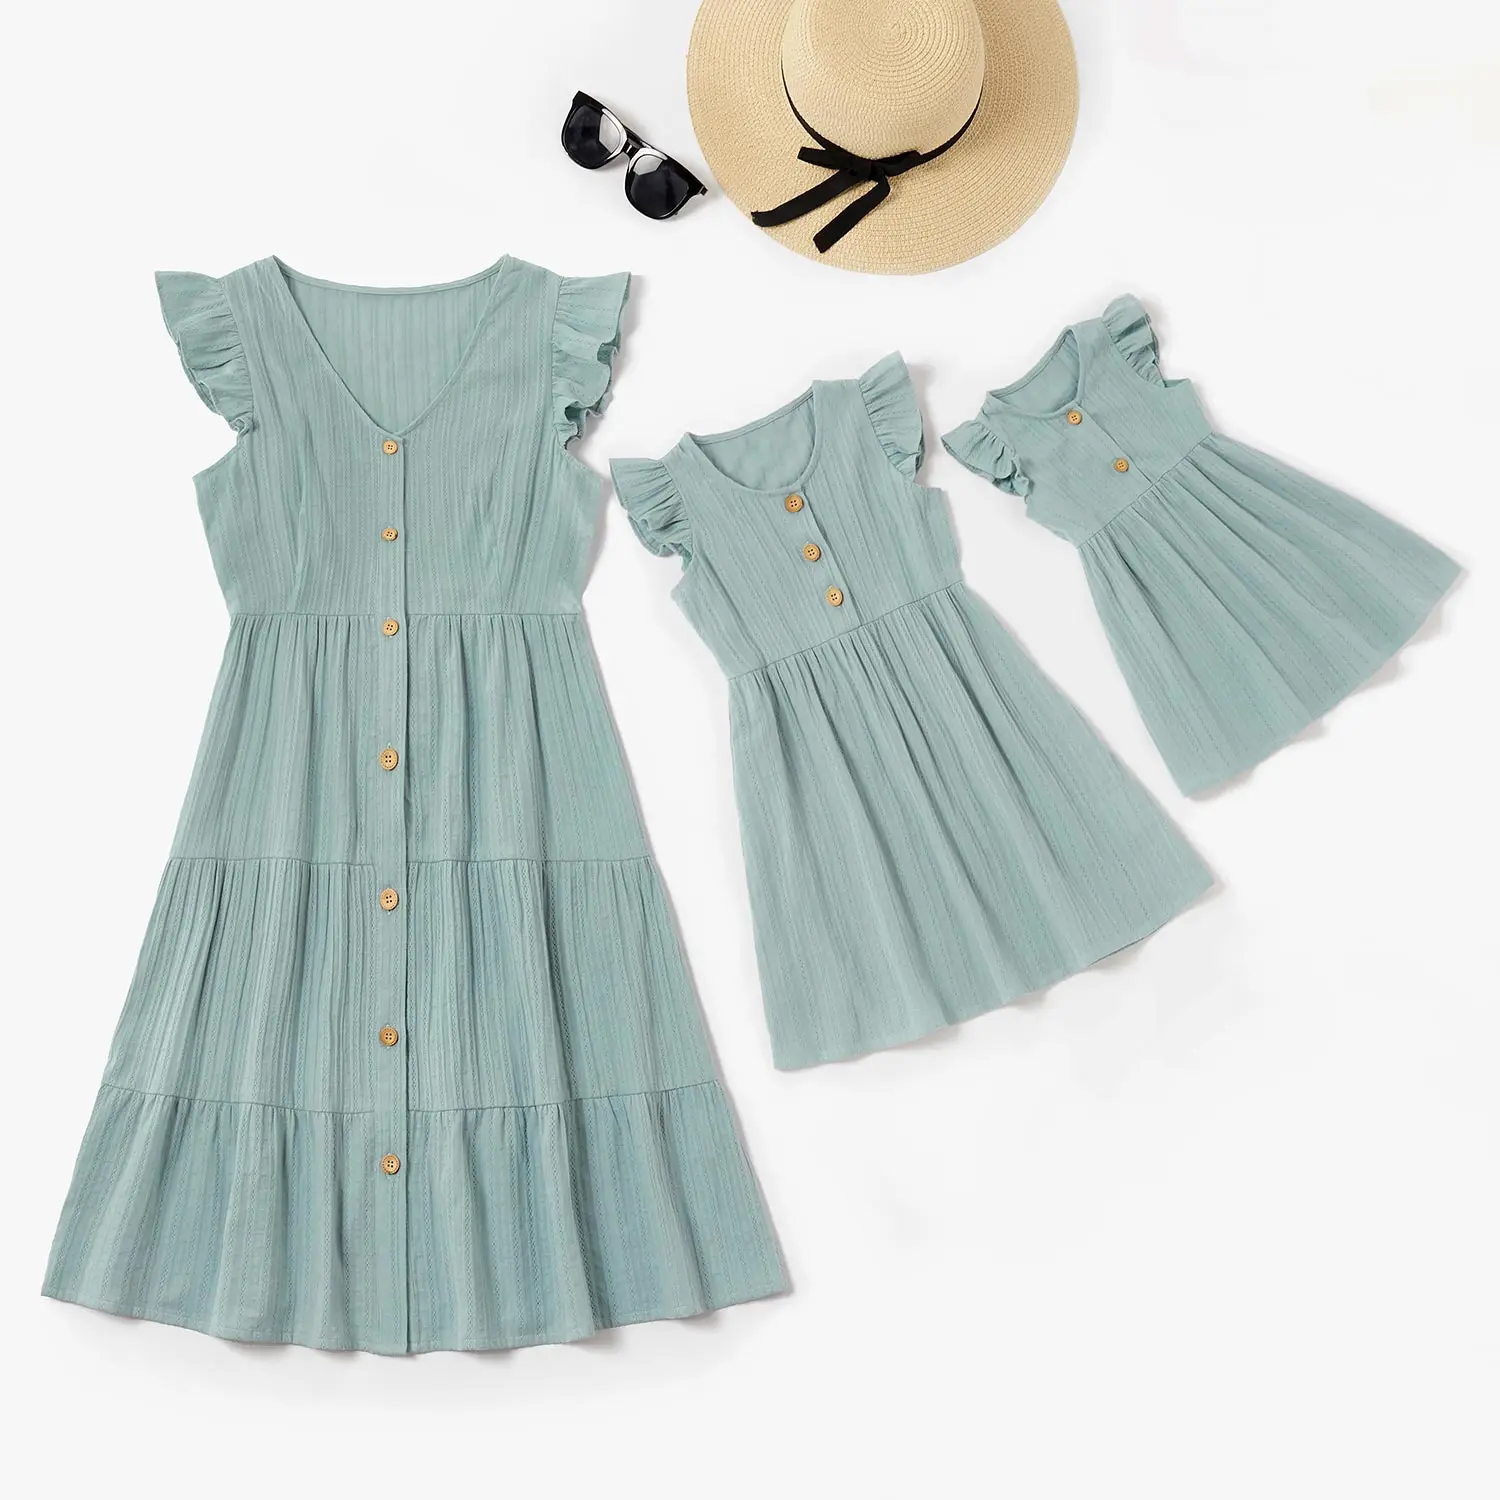 PatPat  New Arrival Summer Cotton Solid Ruffle Matching Dresses Matching Outfits Mommy and Me Mother and Children's Clothing